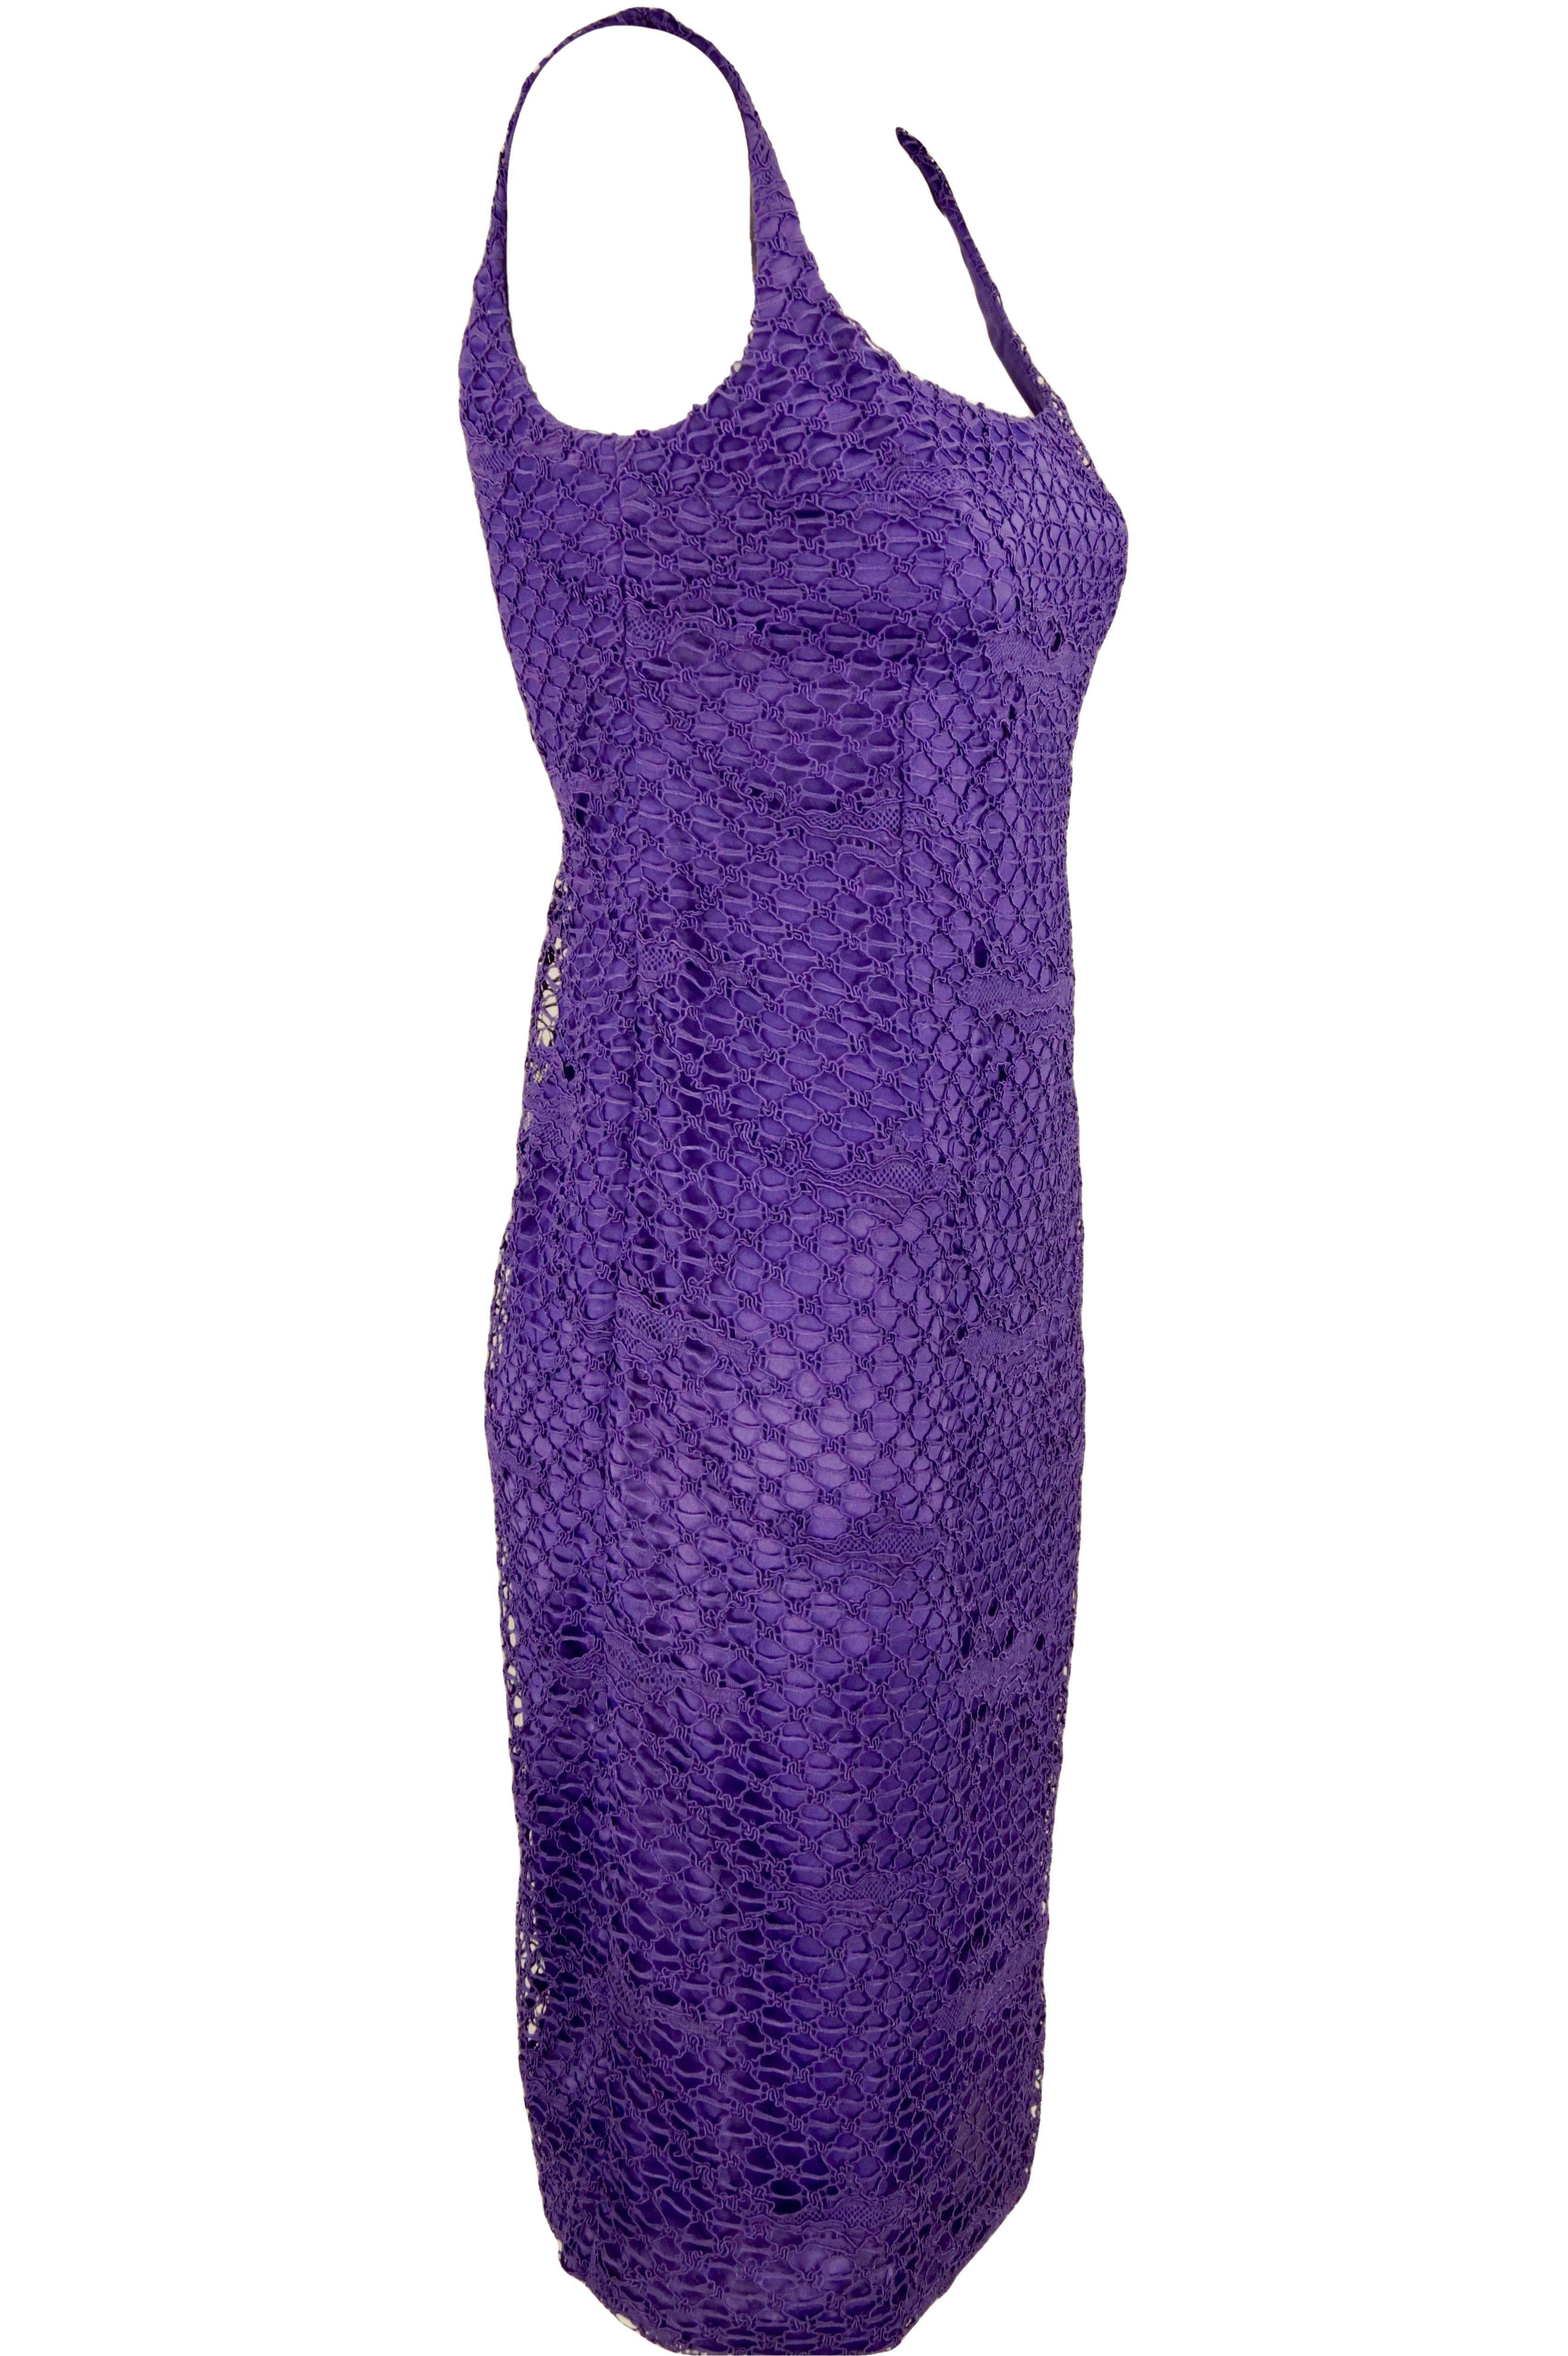 Gianni Versace Couture purple lace dress For Sale 1